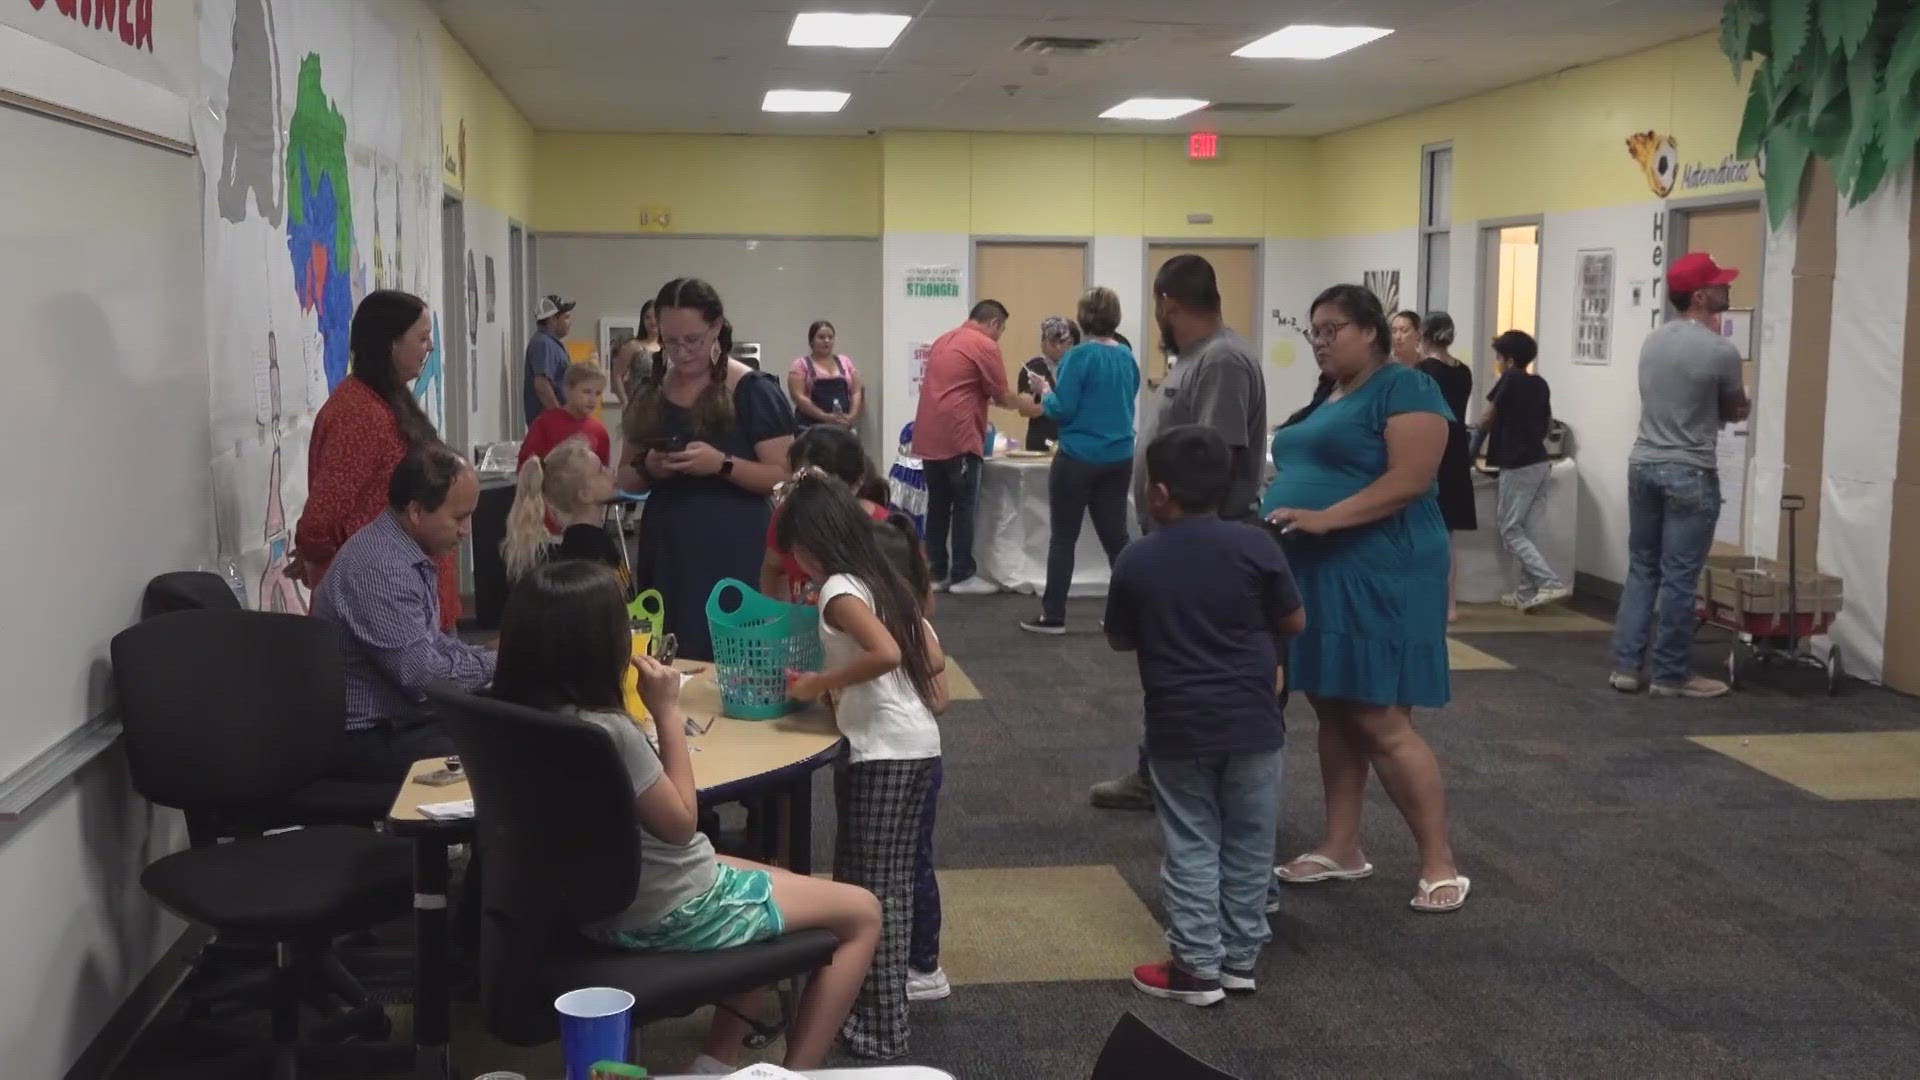 Students, families and staff got together to learn about Hispanic culture in a fun way.